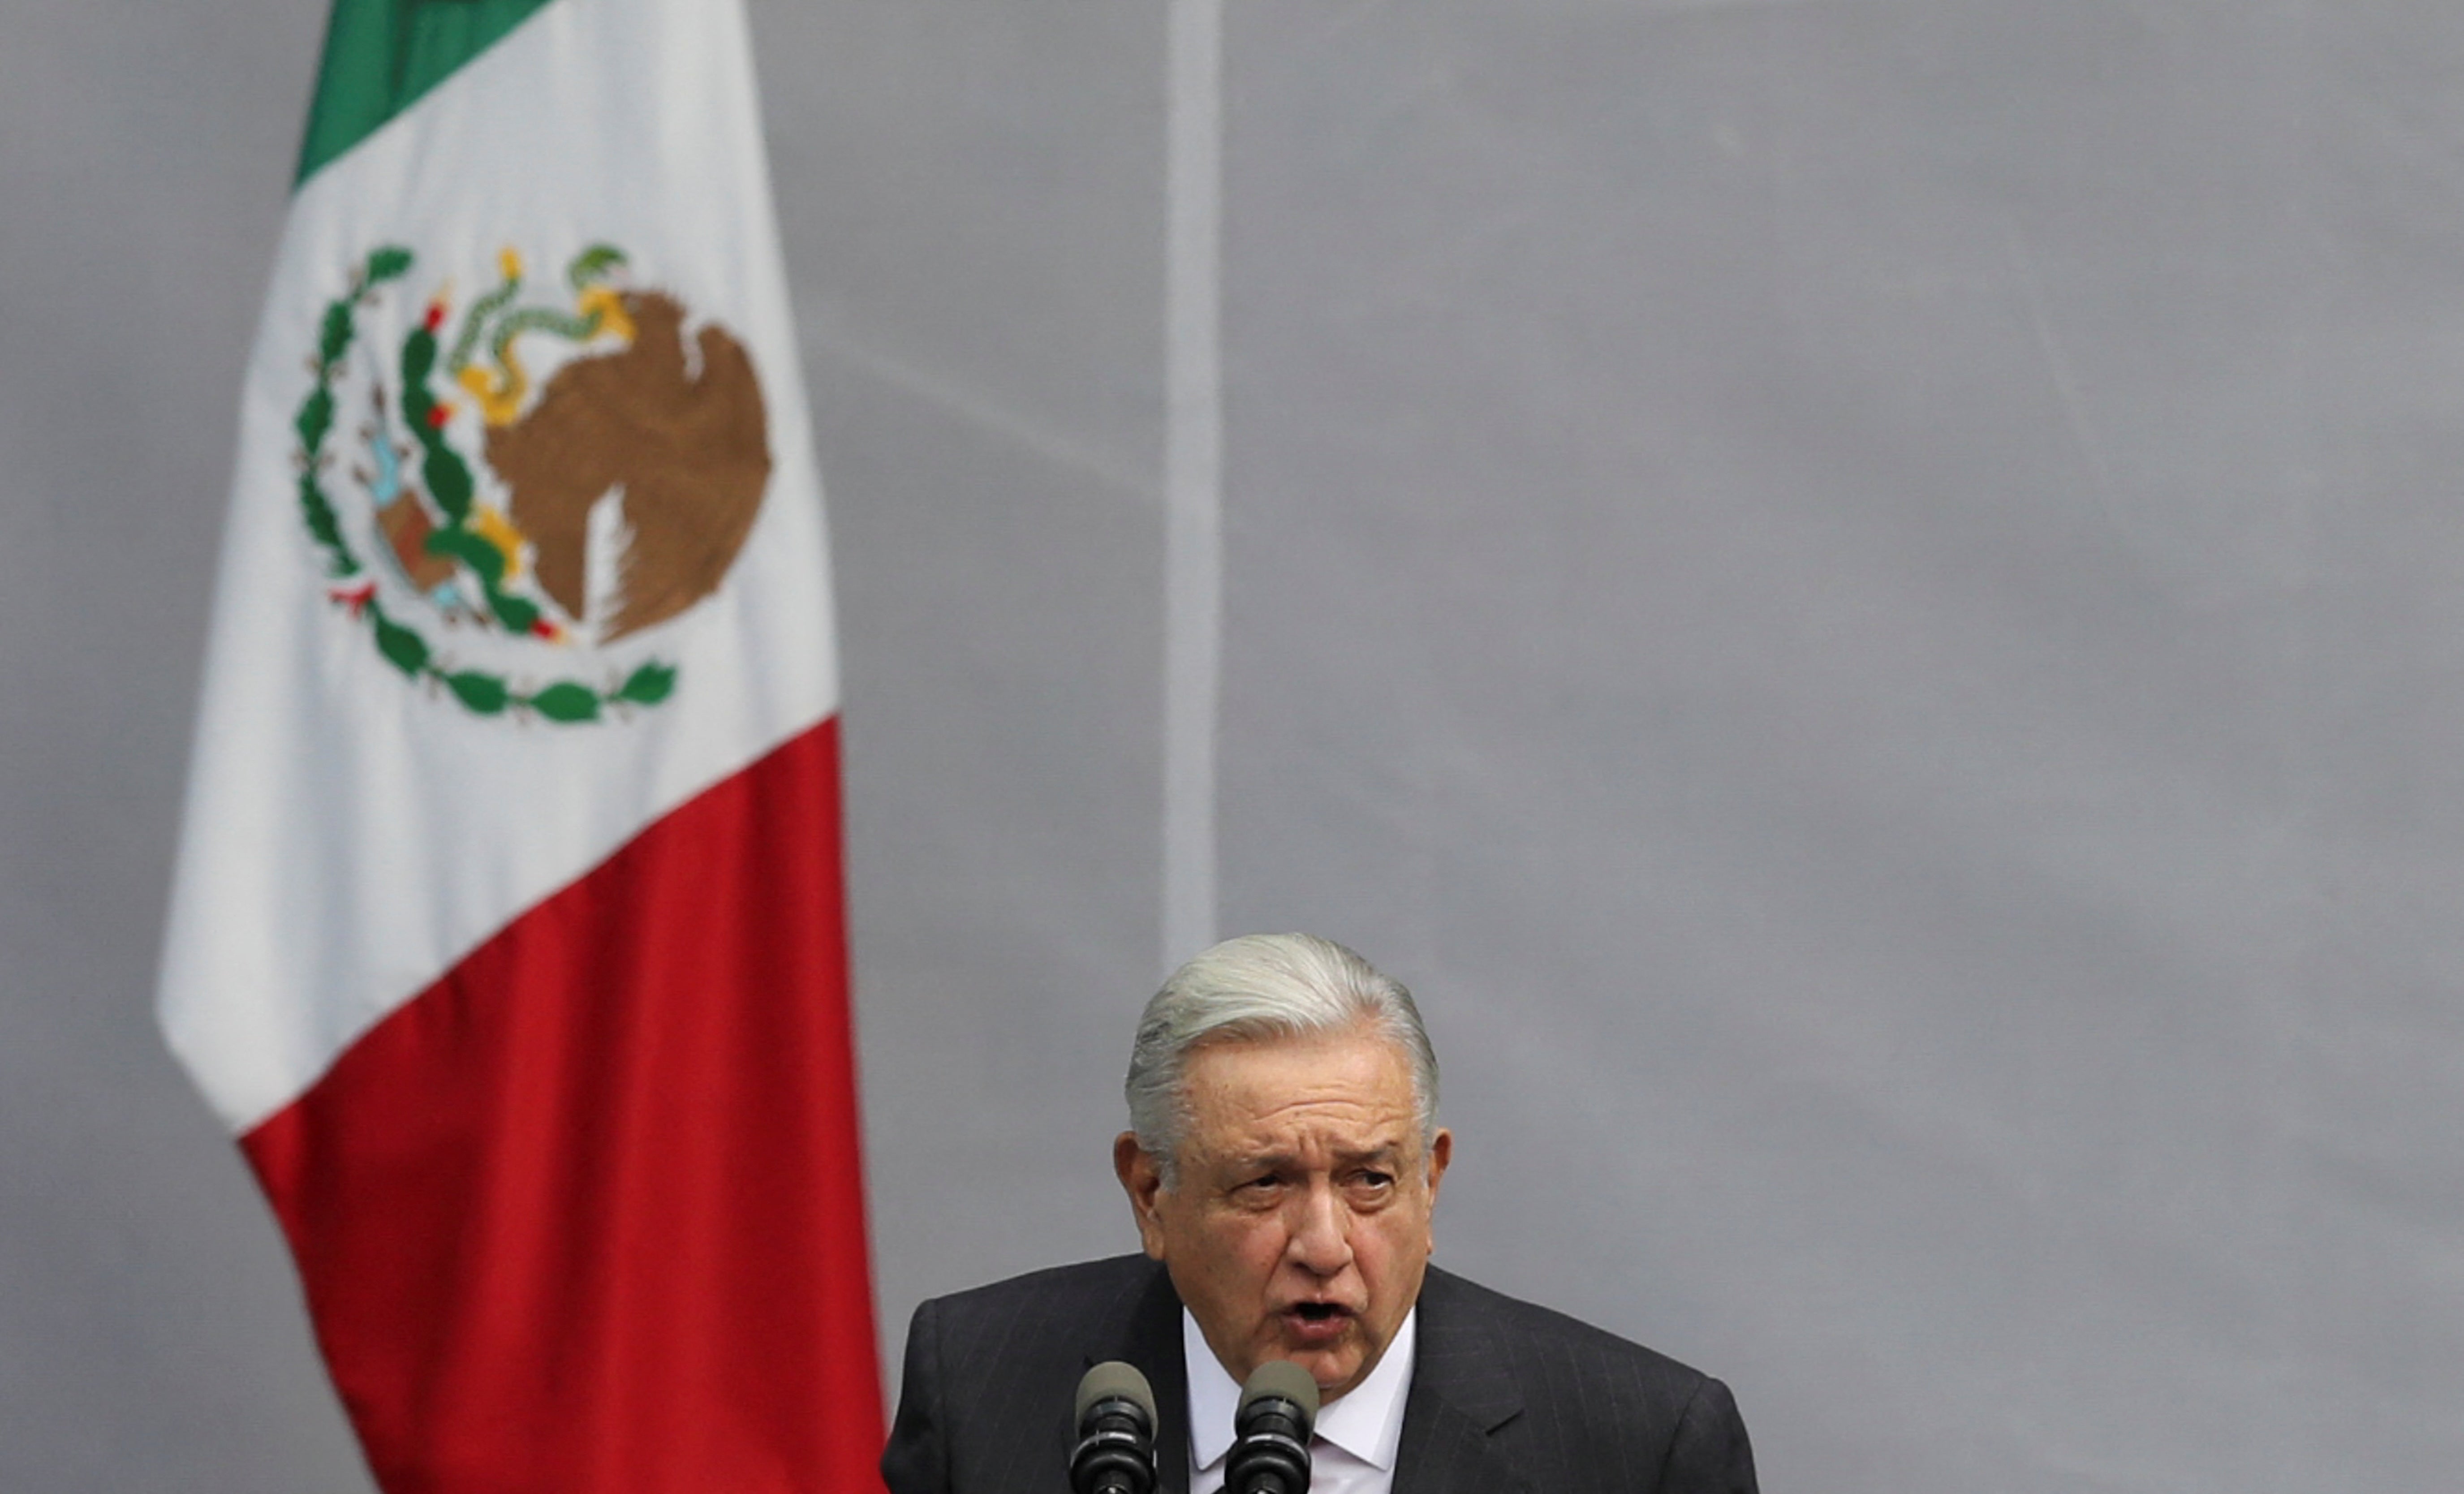 Mexican president accuses Pentagon of spying, vows to restrict military information